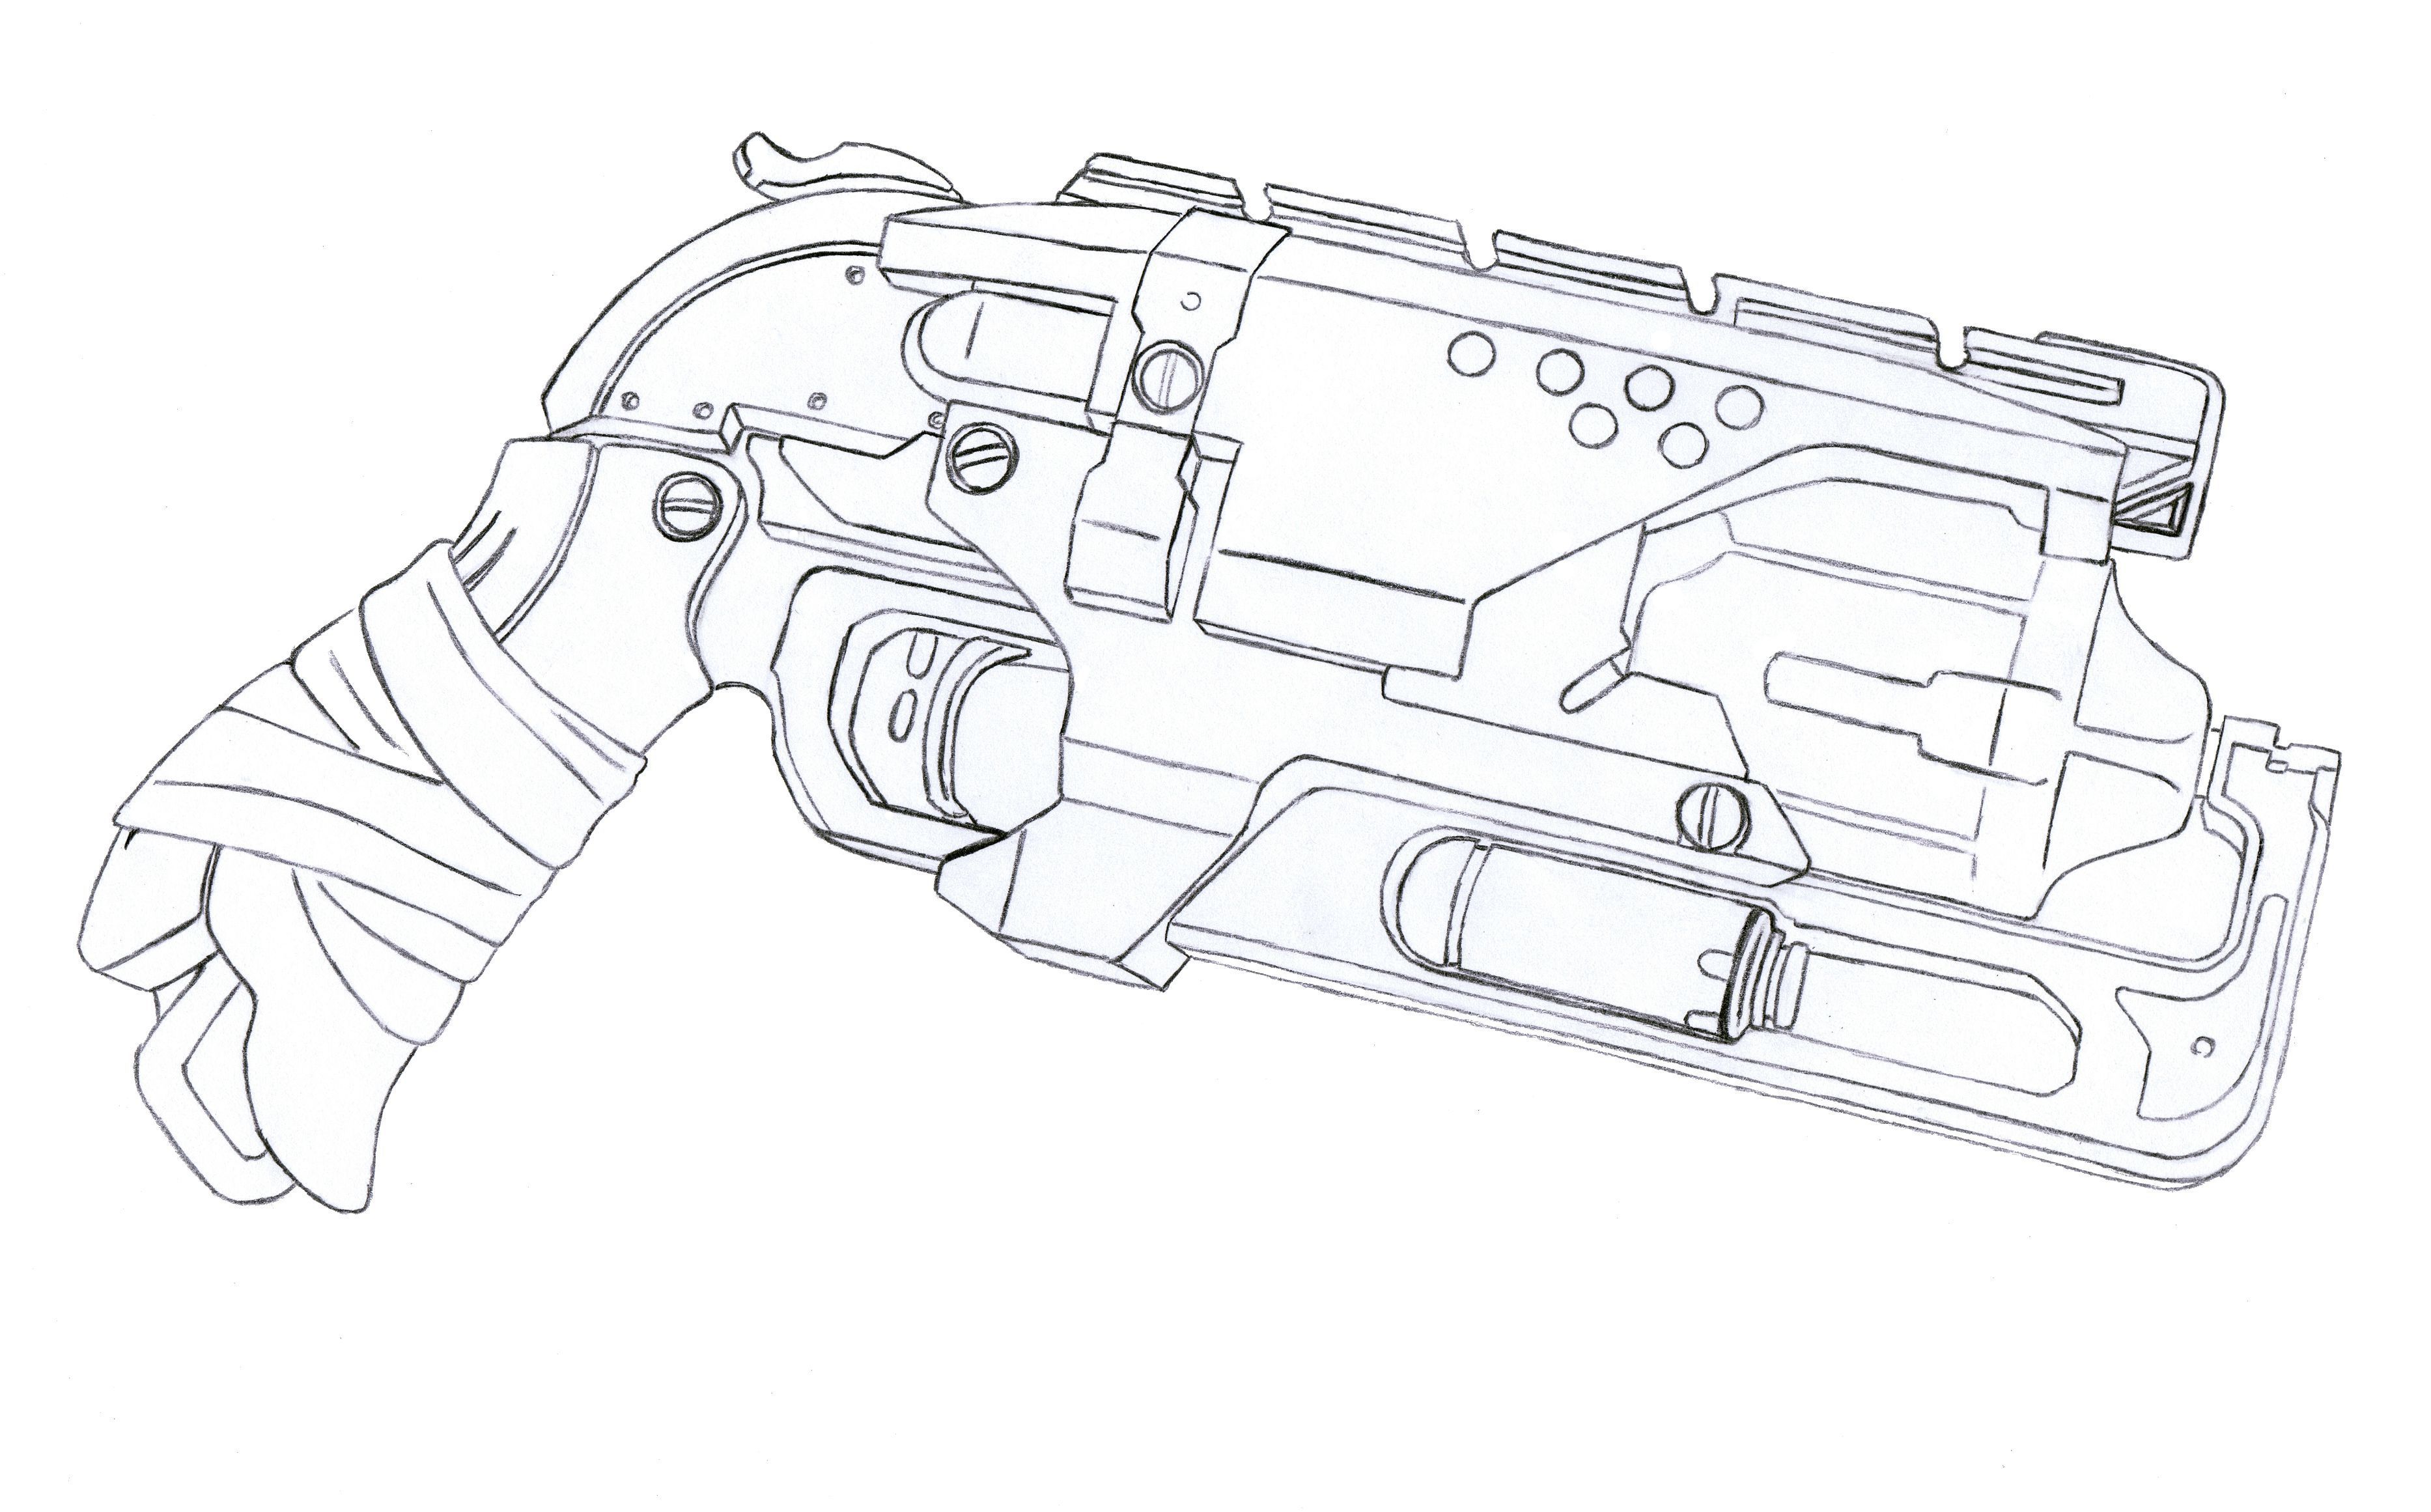 Nerf Gun Sketch at Explore collection